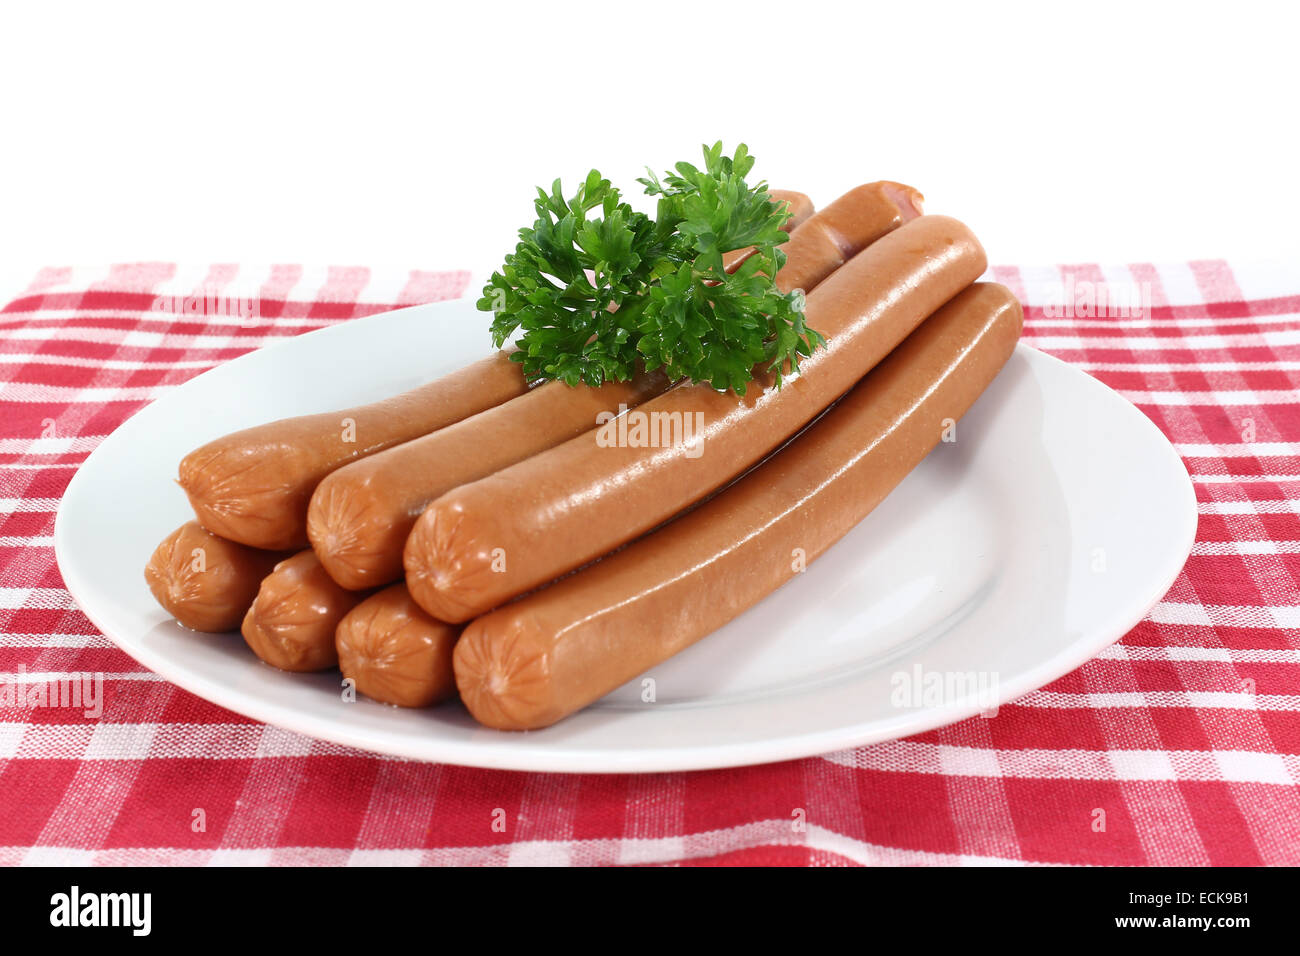 Wiener sausage with parsley on a plate Stock Photo - Alamy